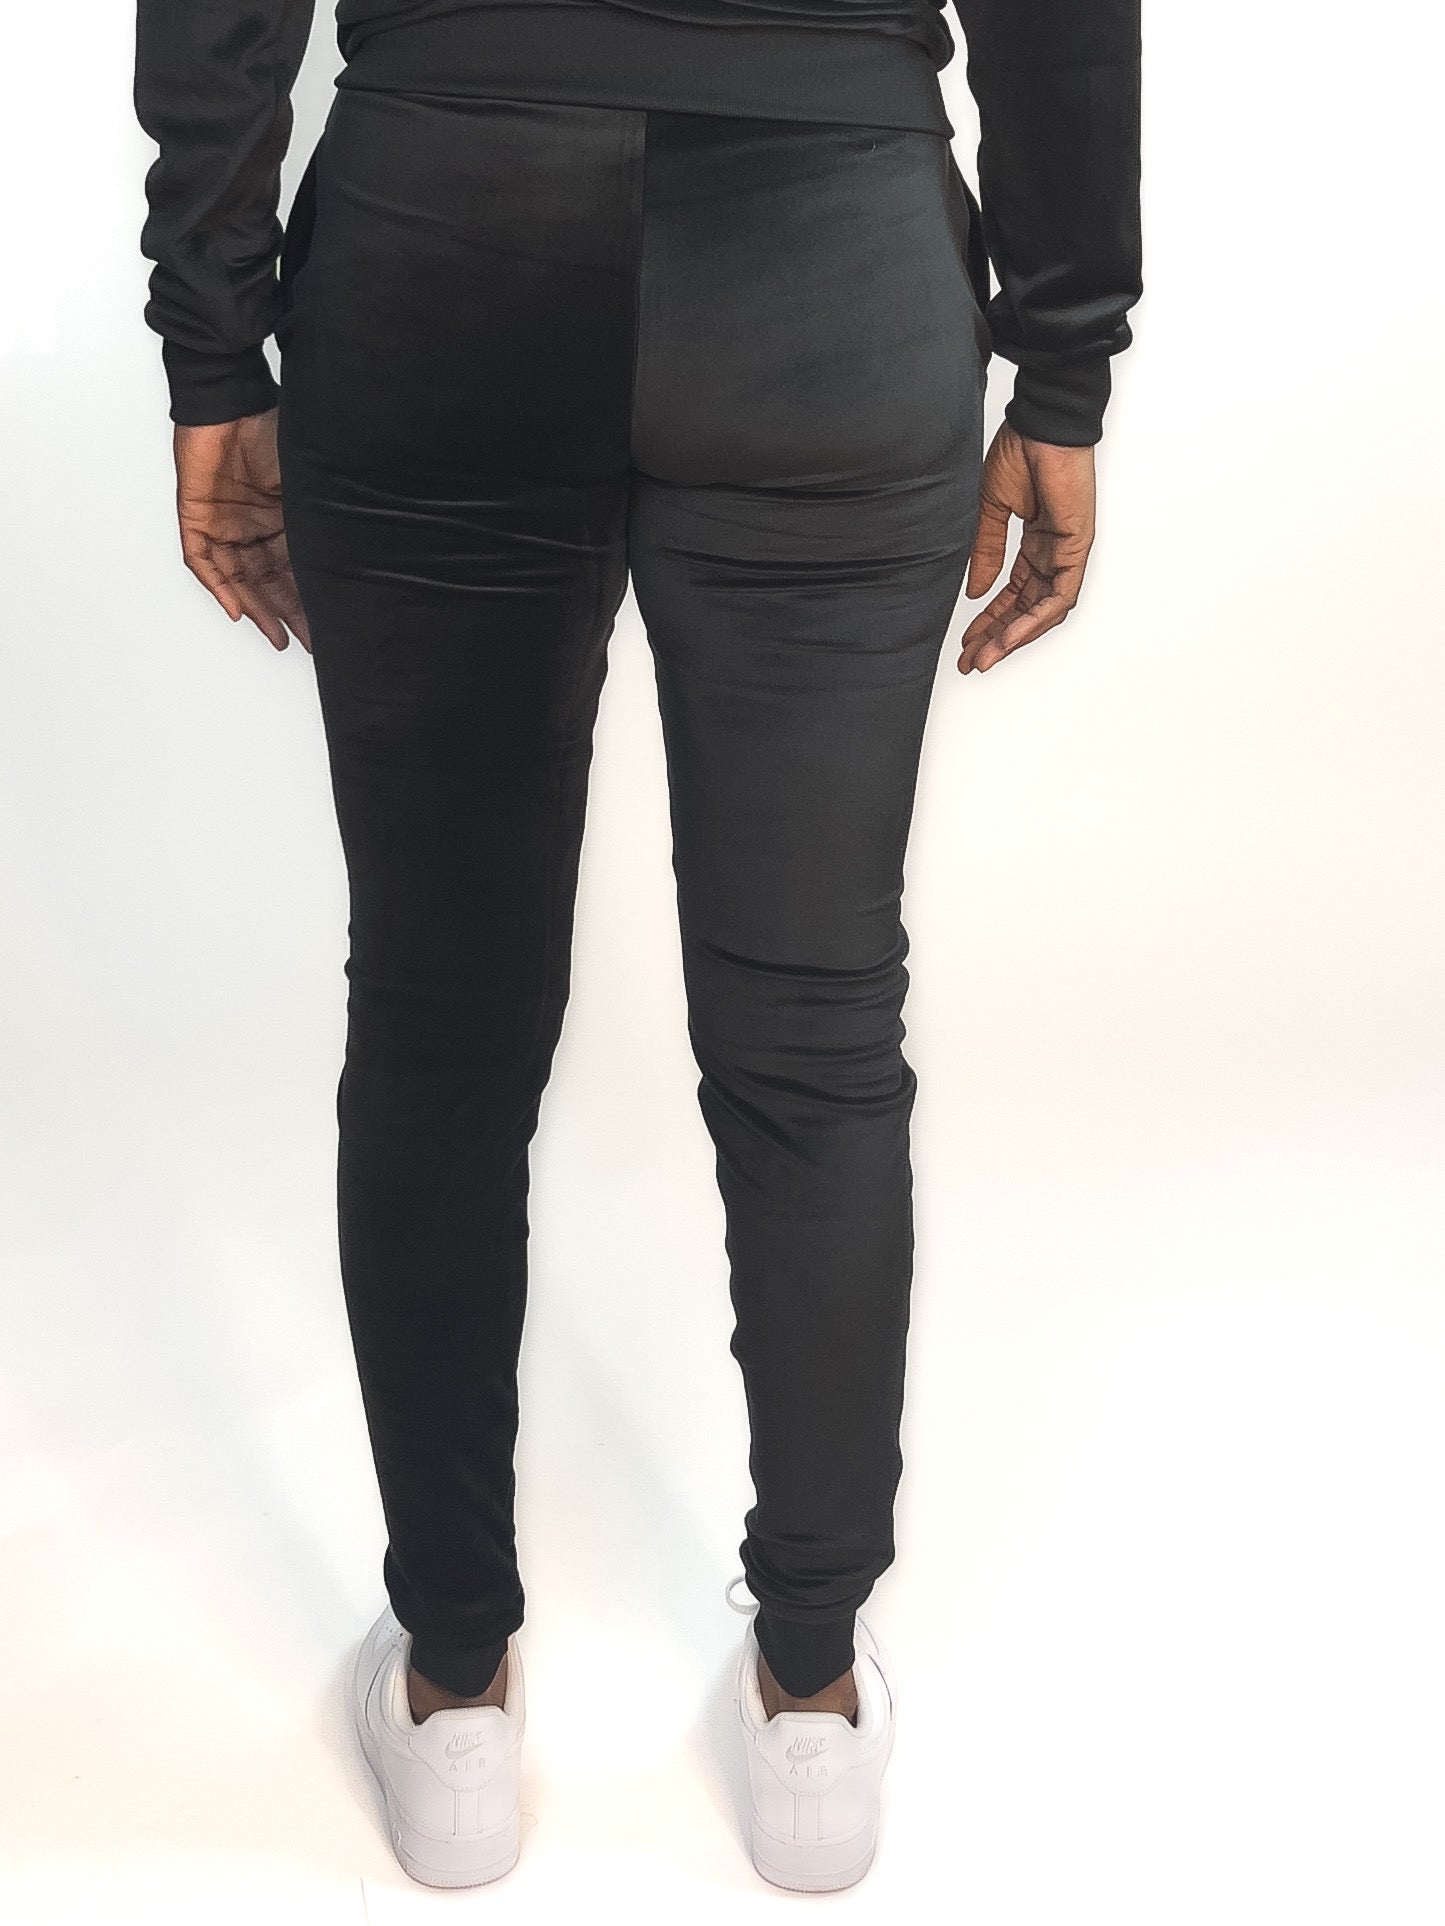 Soft black velour pants designed for tall women and girls with extended length, offering a comfortable and trendy fit.